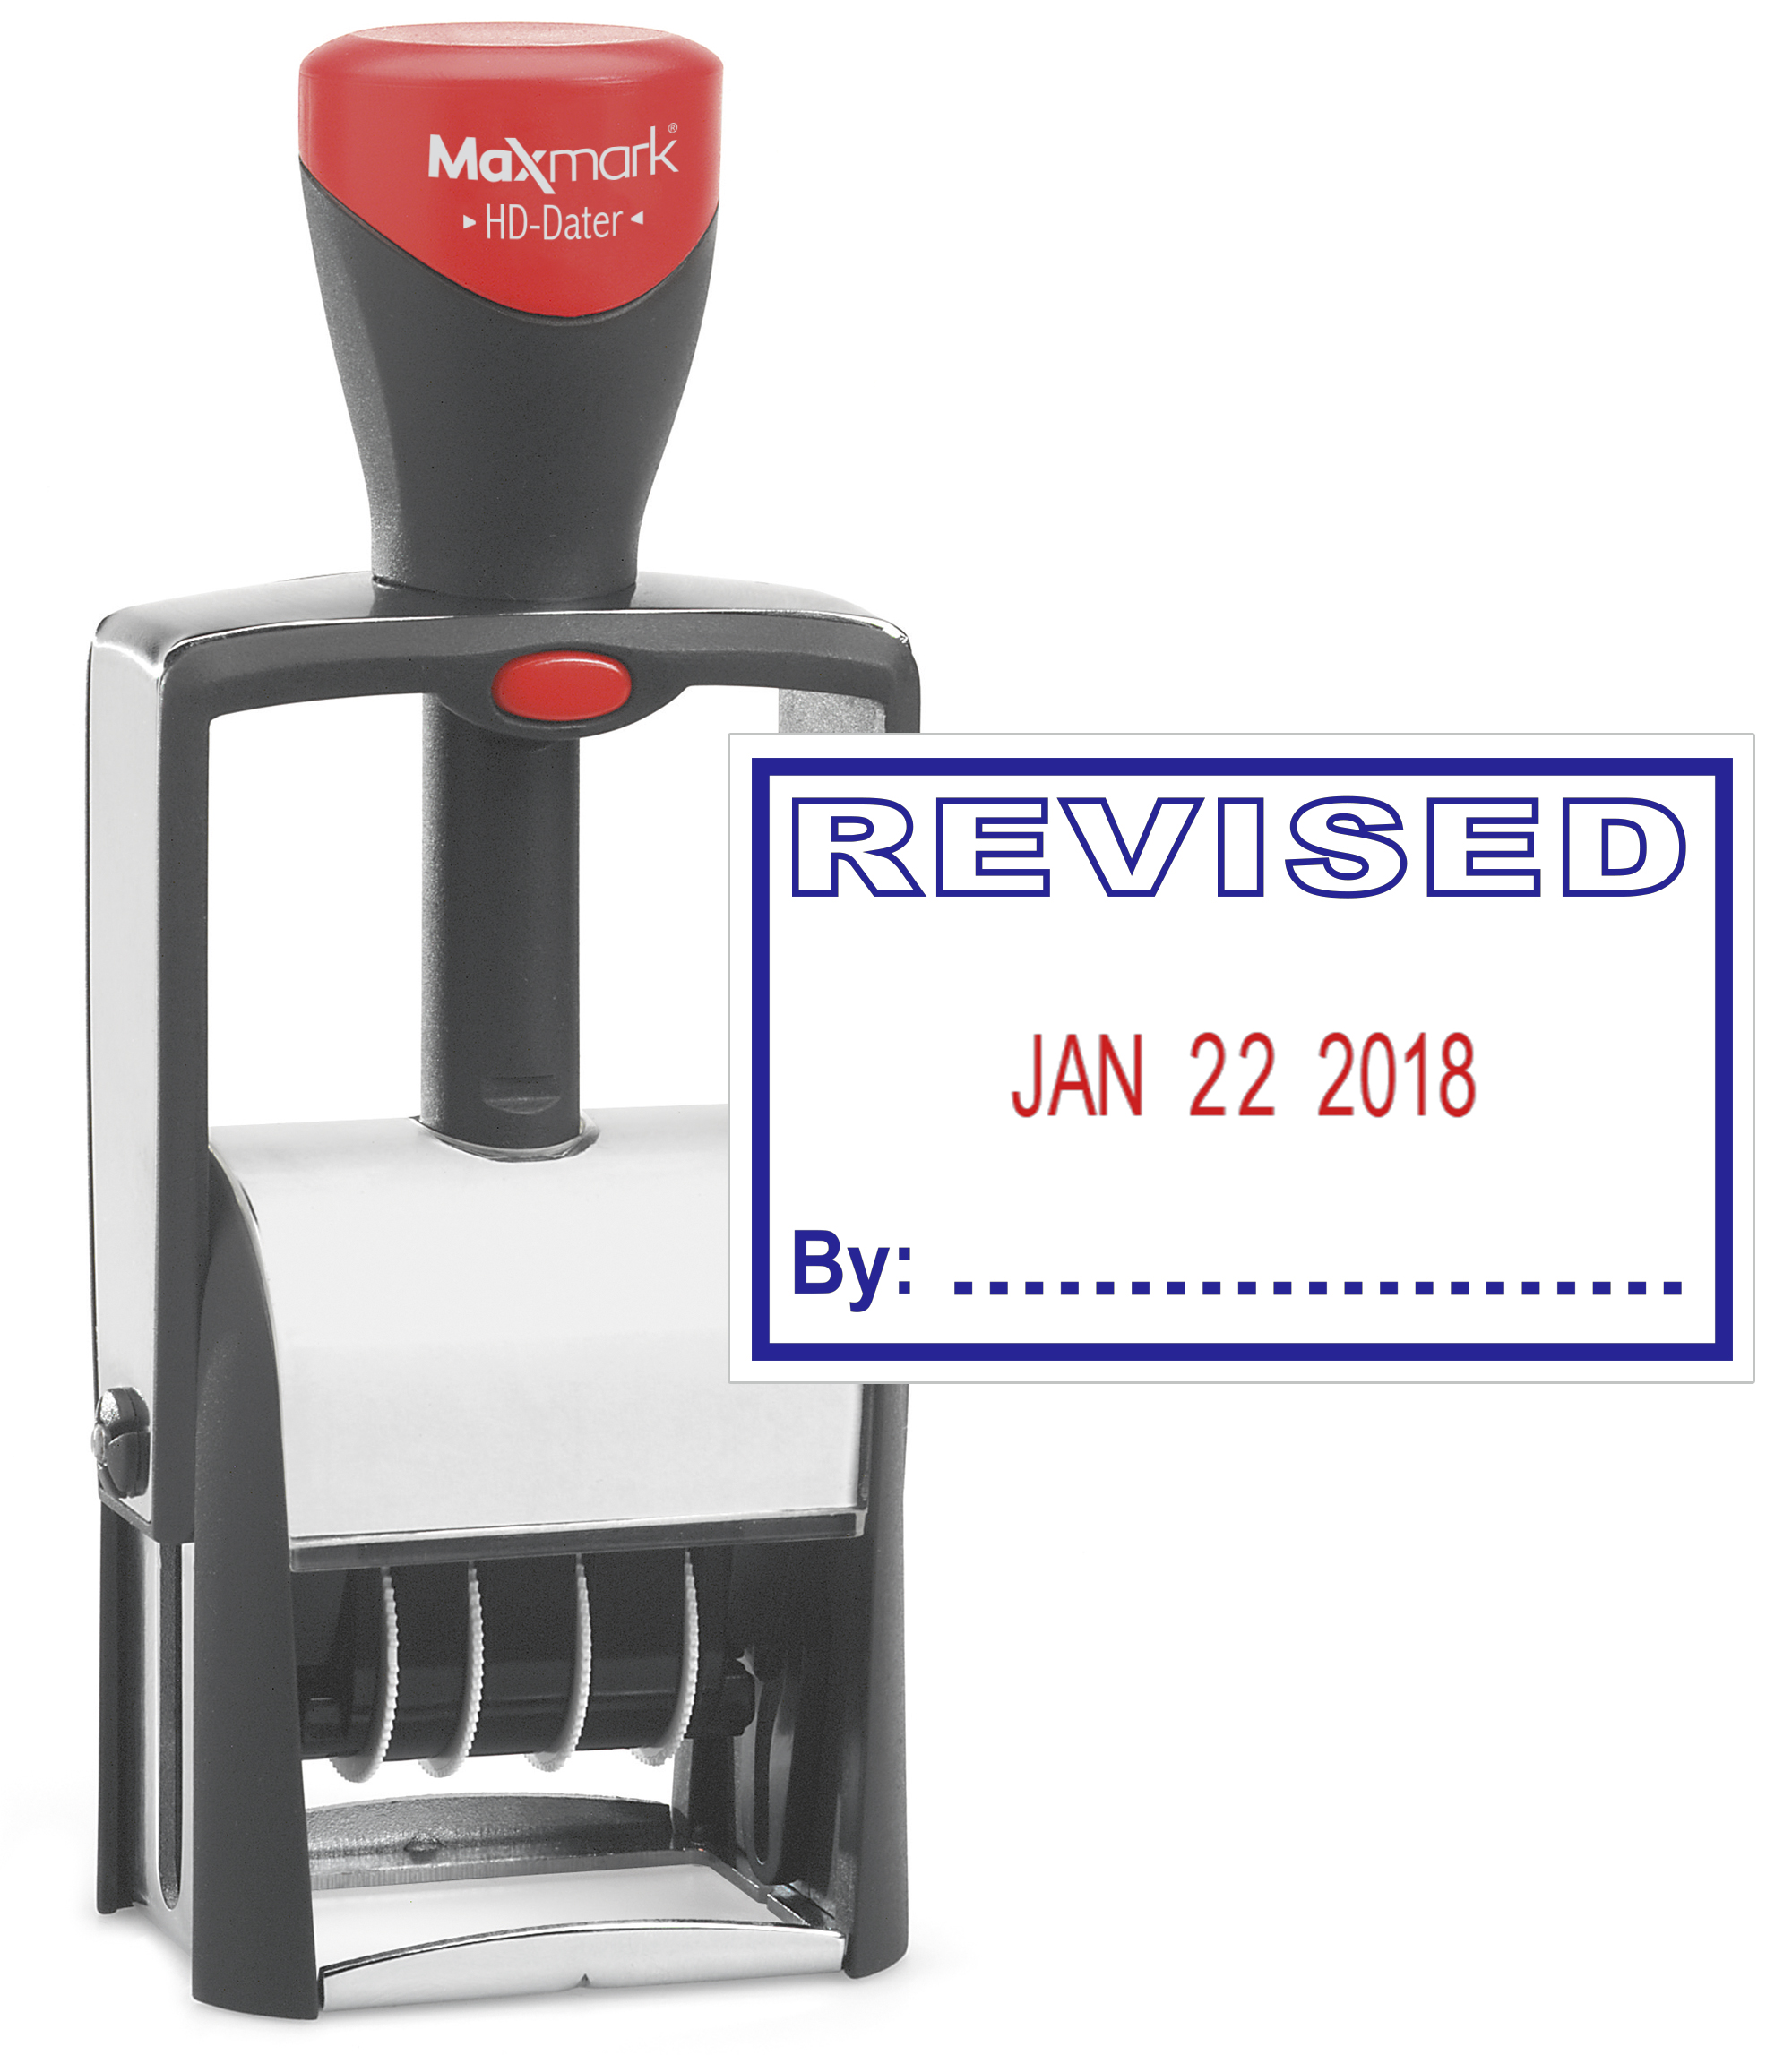 Heavy Duty Date Stamp with "REVISED" Self Inking Stamp - 2 Color Blue/Red Ink